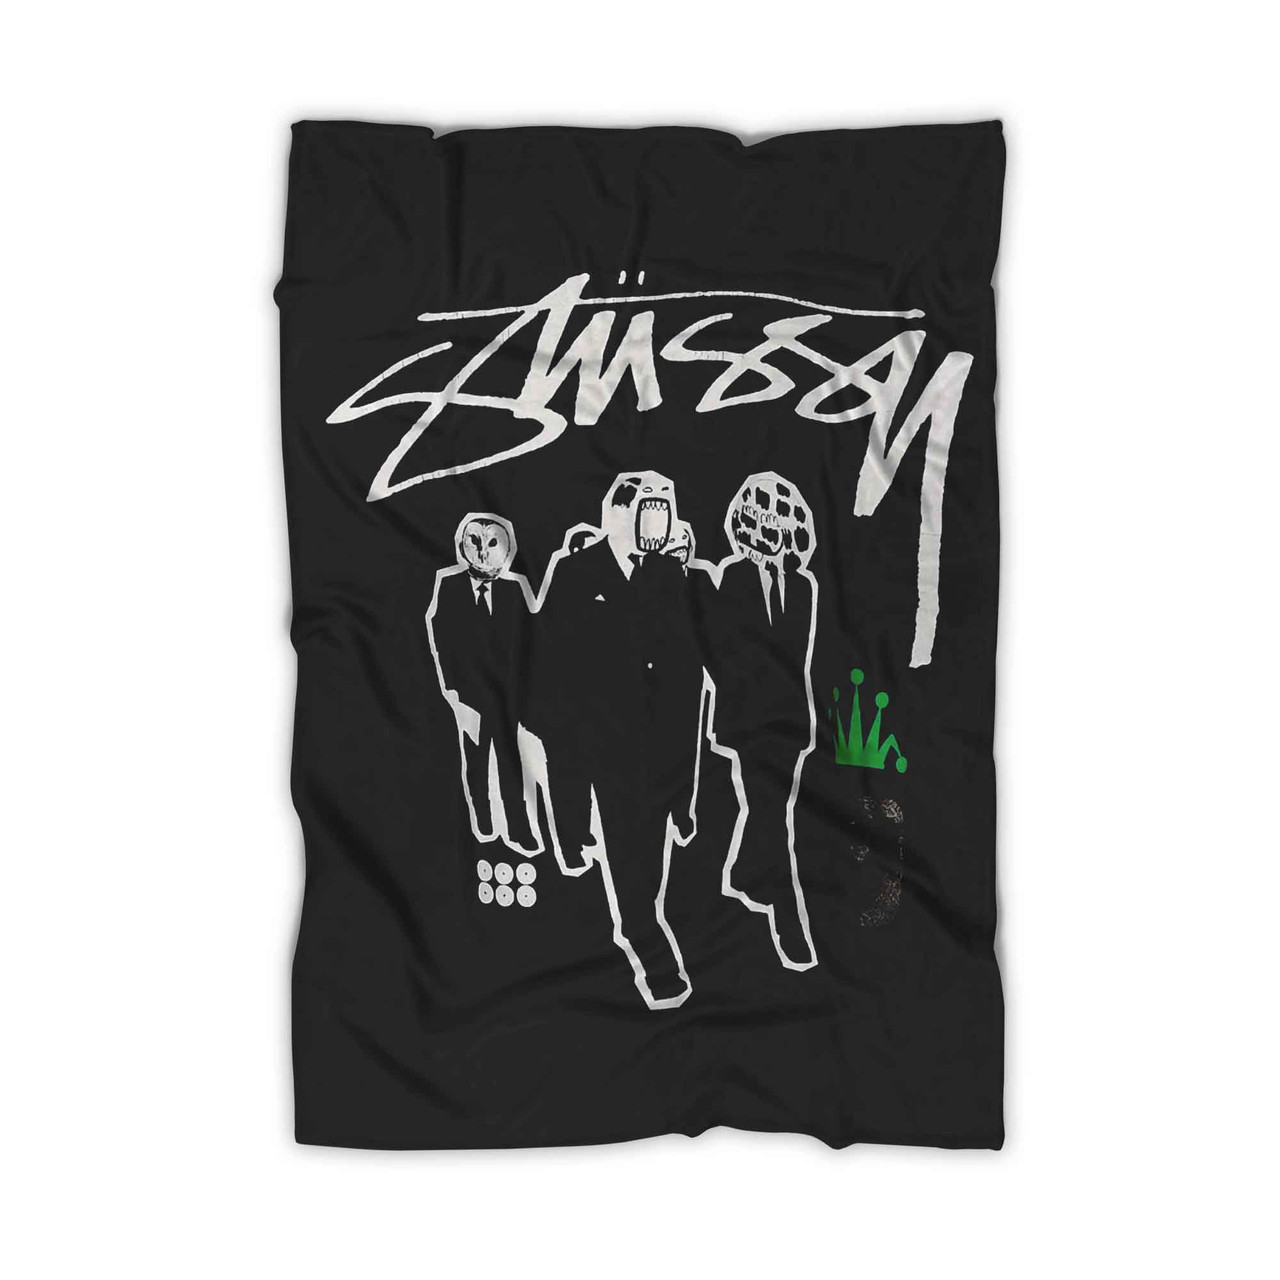 Designed by Alex on X: Stussy Poster I made a while ago What do